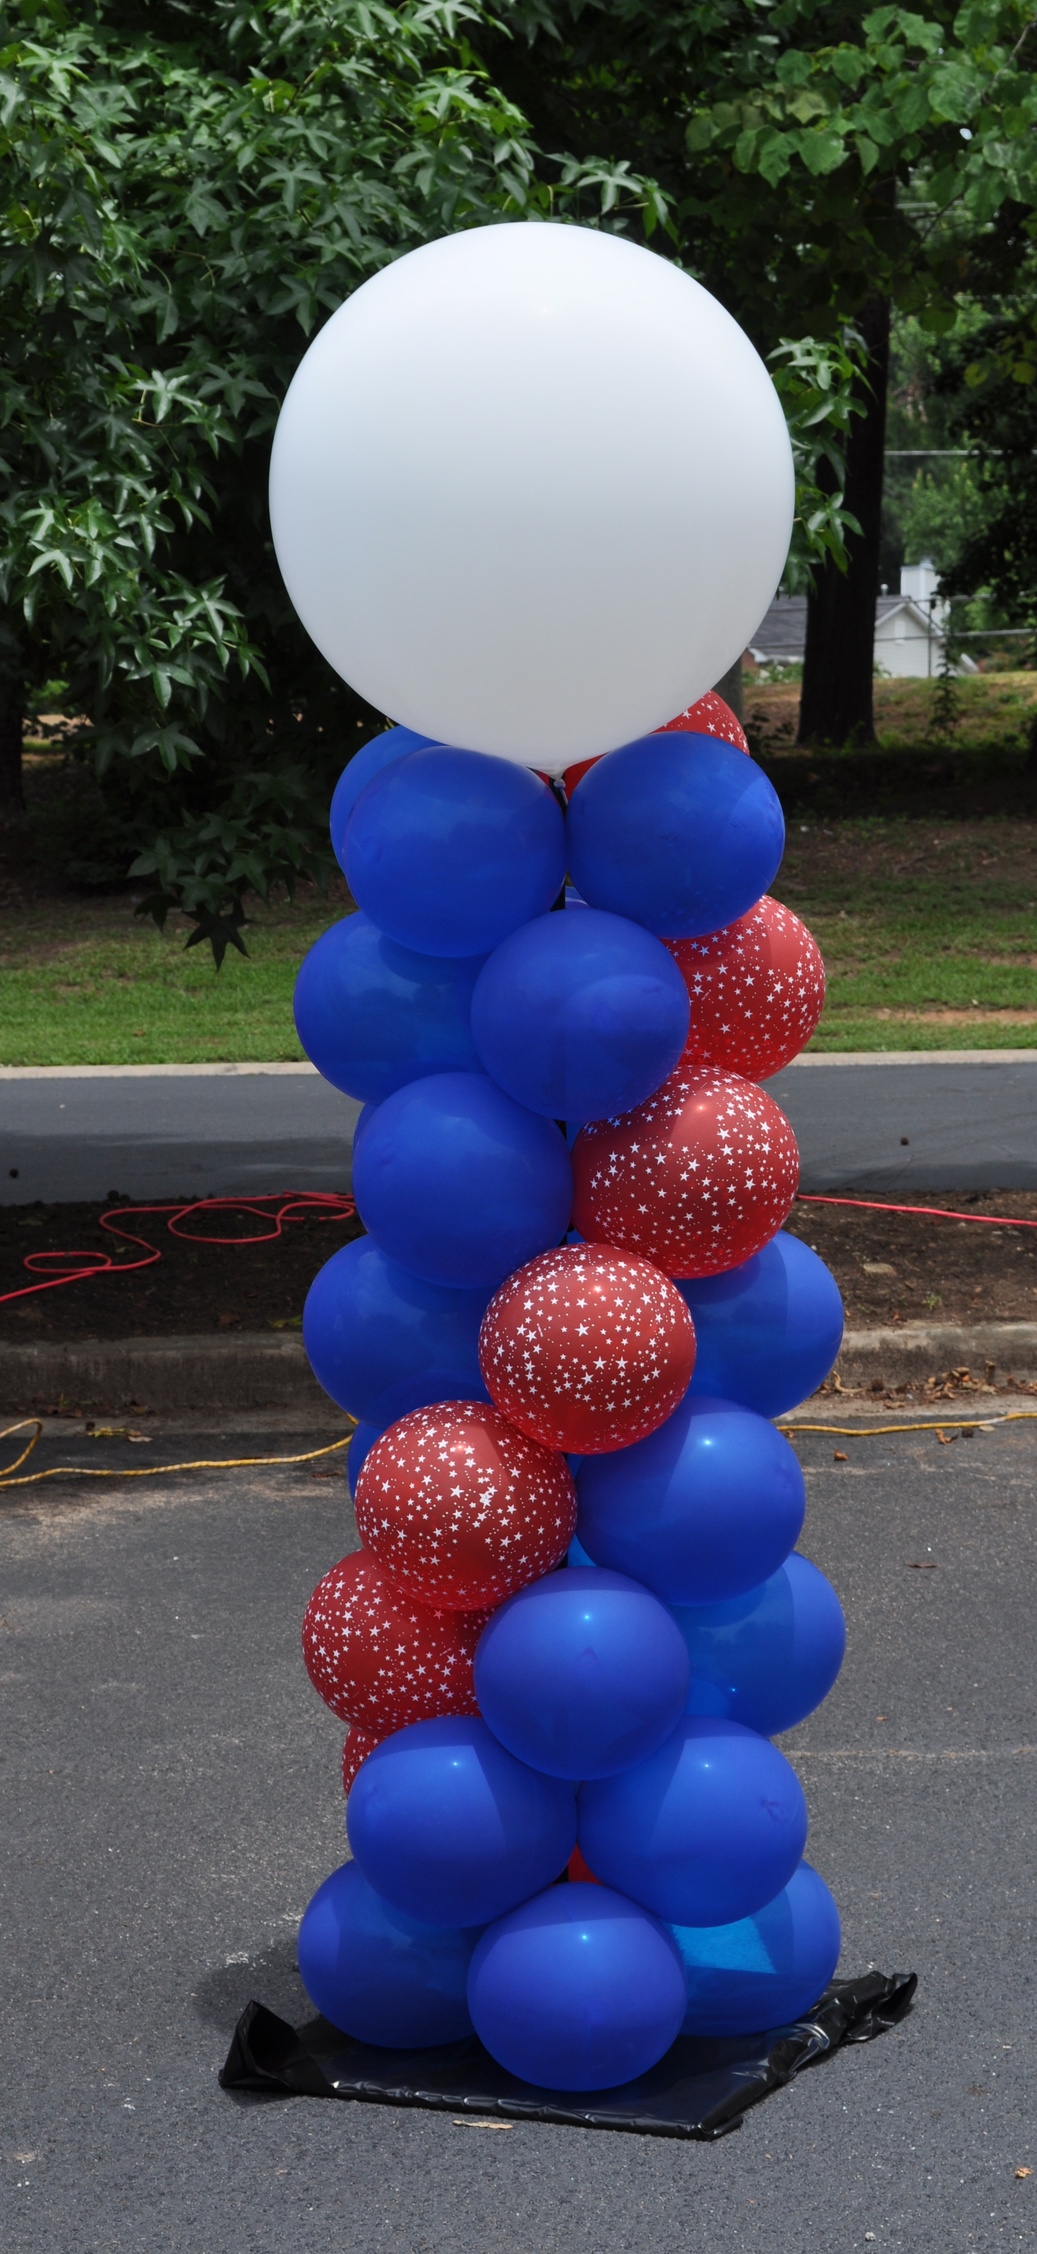 Red white and blue outdoor balloon column